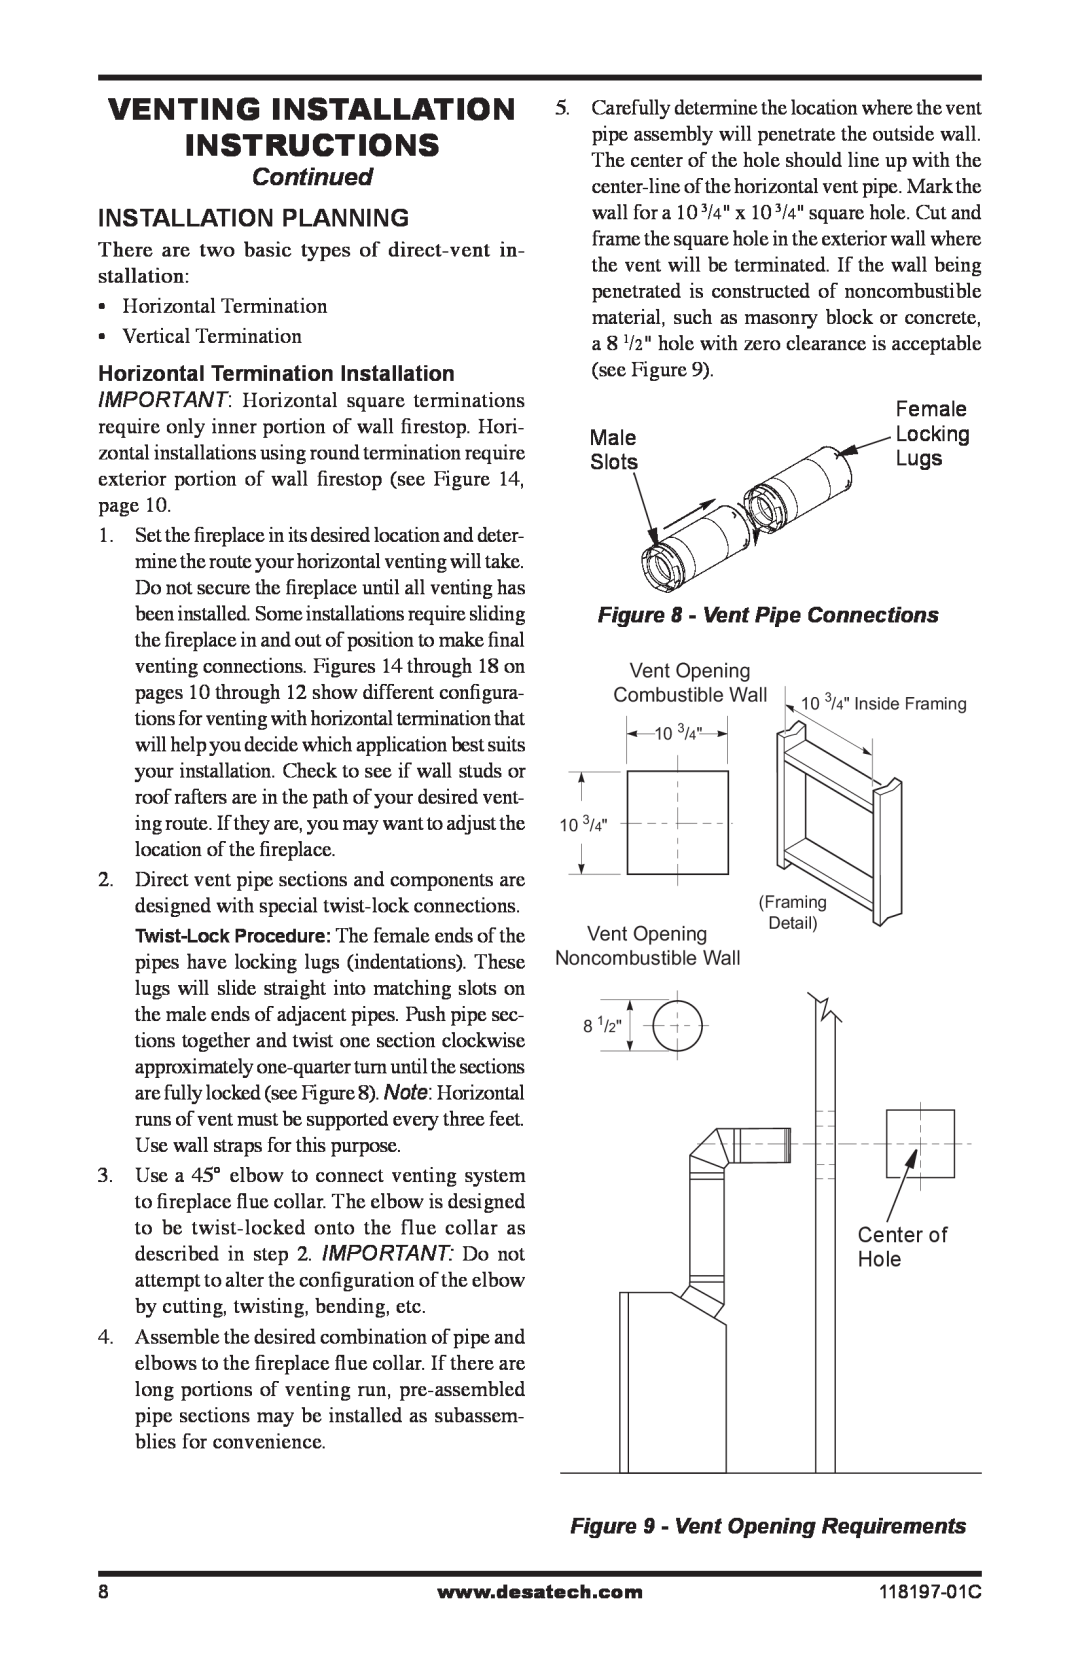 Desa (V)DVC42(B)(H) Venting Installation instructions, Continued, There are two basic types of direct-vent in- stallation 